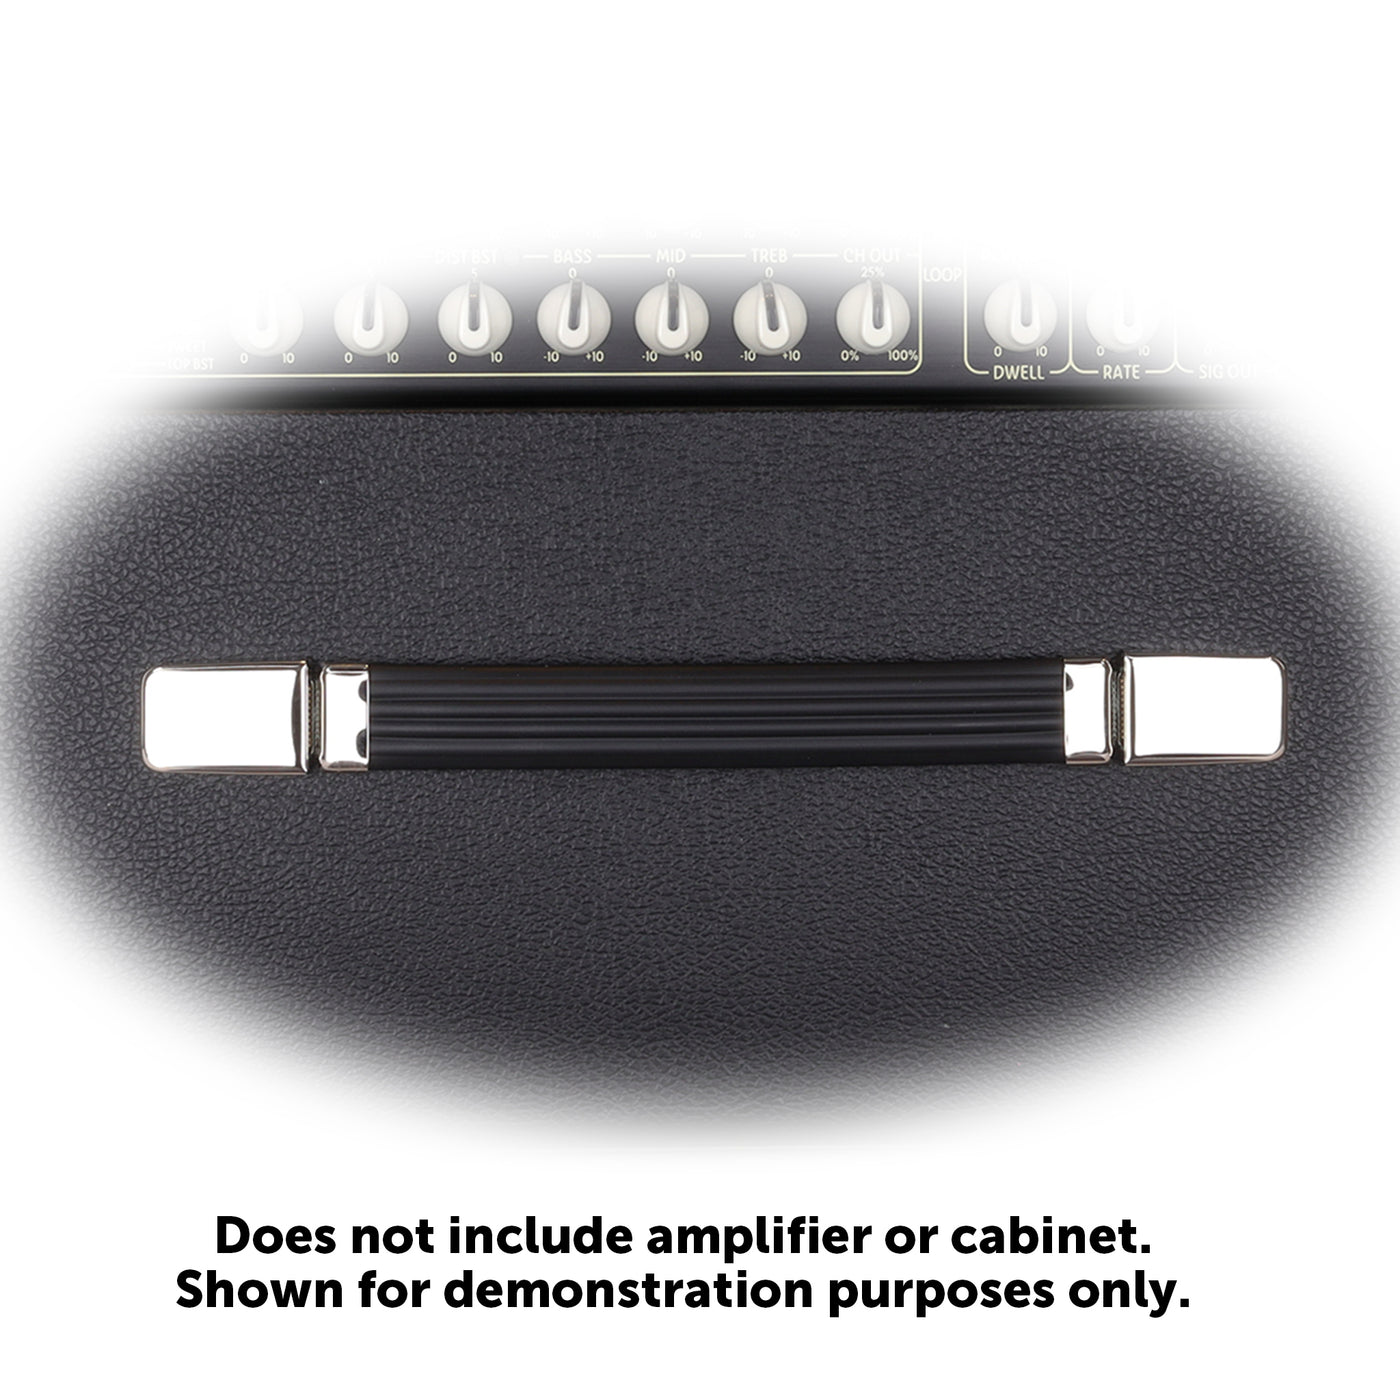 Close up of Quilter Labs Aviator Mach 3 amplifier handle with "Does not include amplifier or cabinet. Shown for demonstration purposes only" text below it.